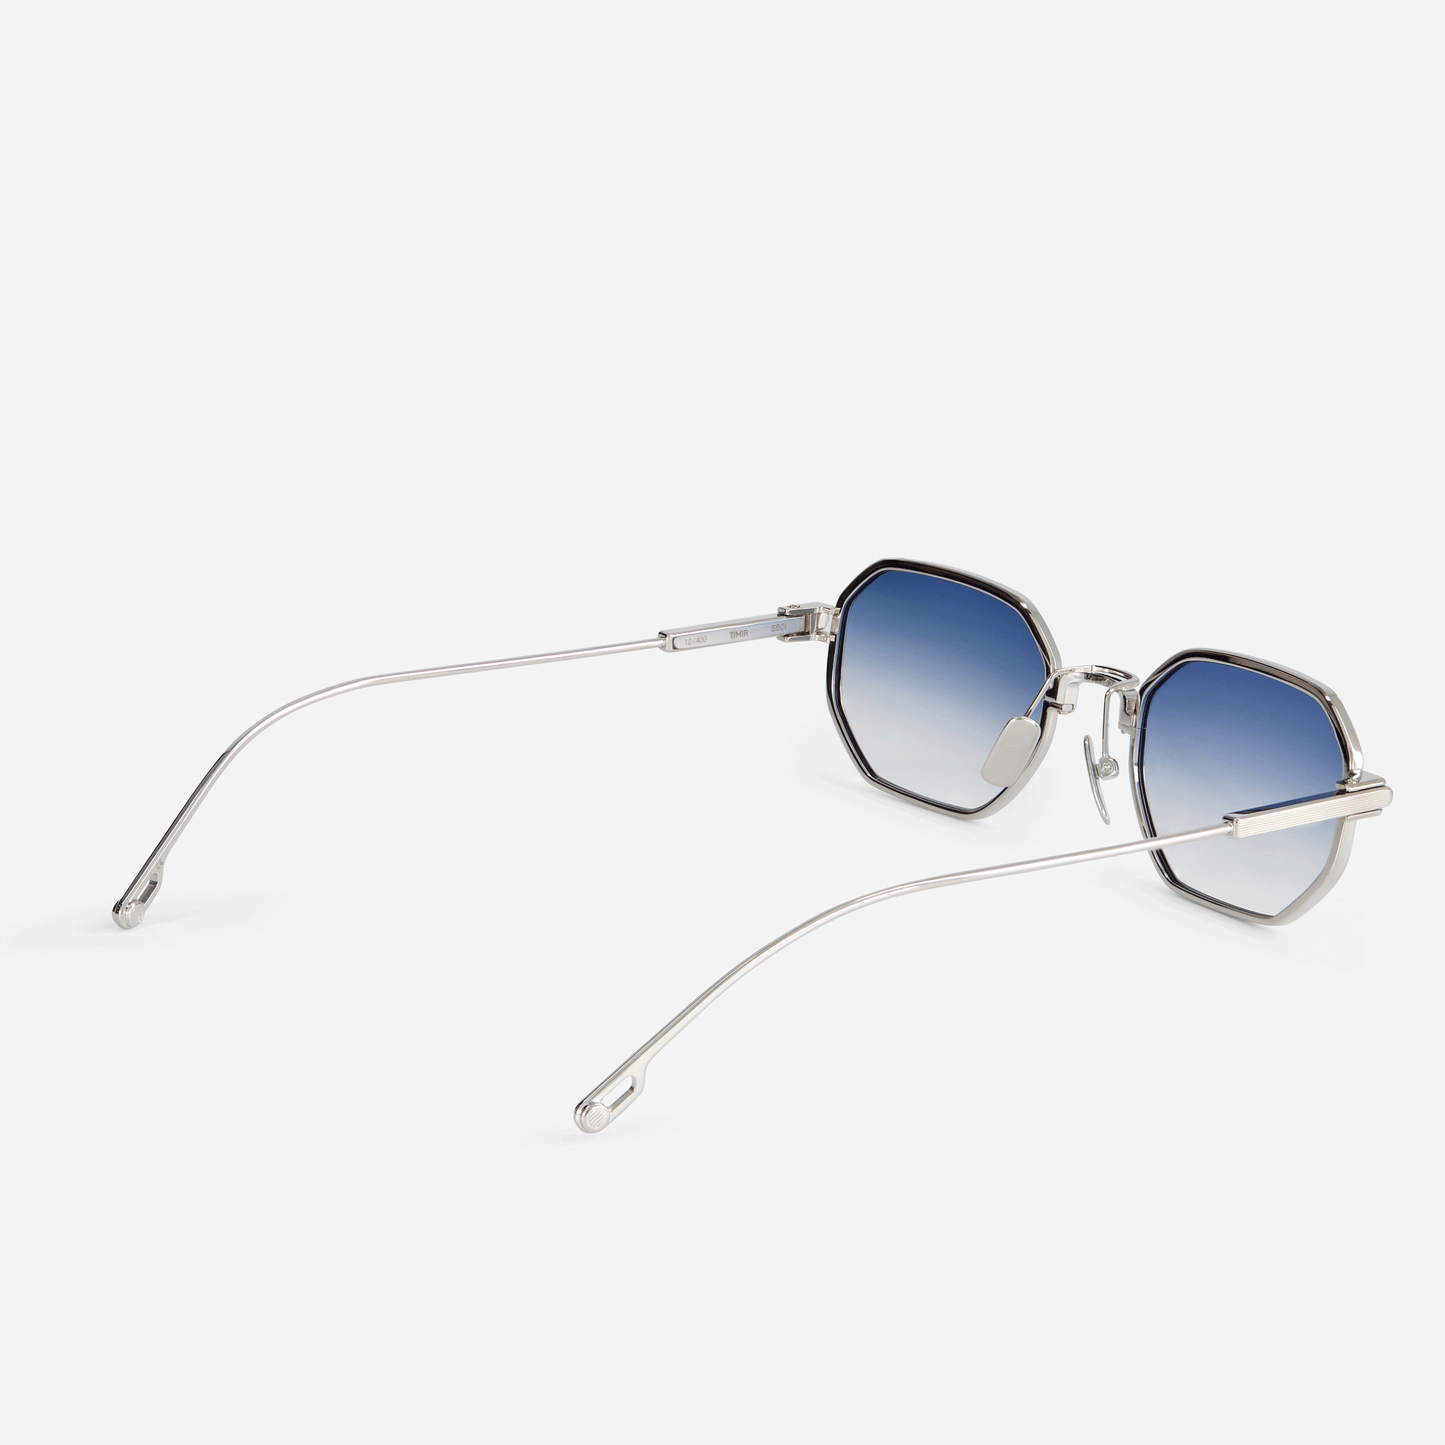 Timir S501 hexagonal glasses, meticulously constructed from high-grade Japanese titanium and featuring sleek blue gradient lenses for a captivating look- side view. Sato eyewear.